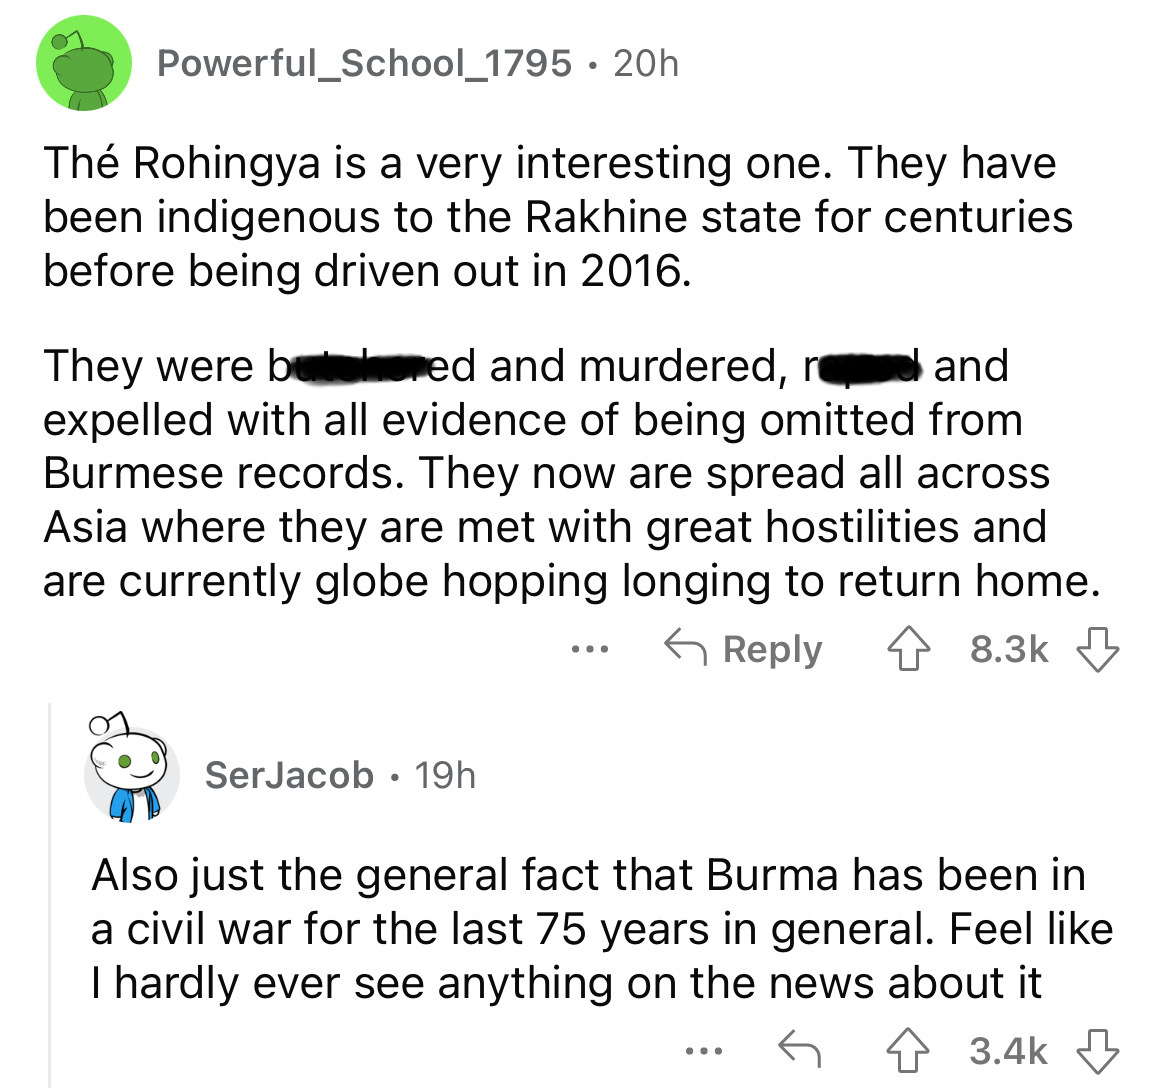 angle - Powerful_School_1795 20h Th Rohingya is a very interesting one. They have been indigenous to the Rakhine state for centuries before being driven out in 2016. They were butchered and murdered, re and expelled with all evidence of being omitted from